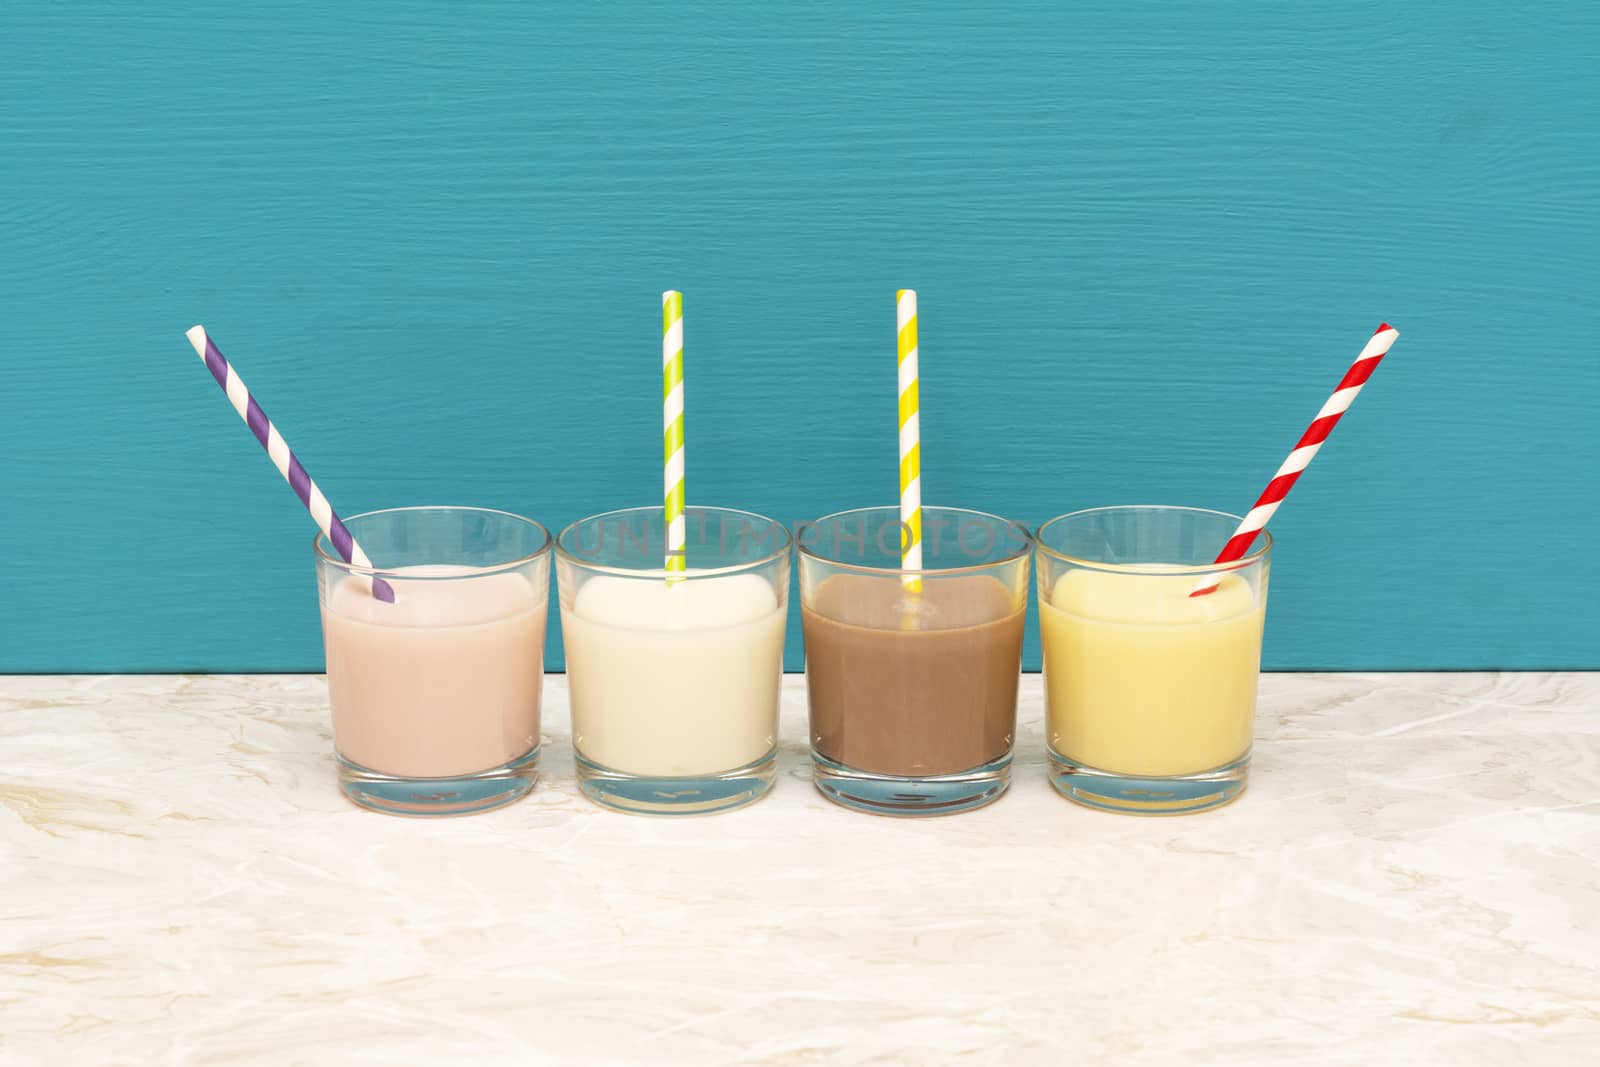 Flavoured milkshakes - strawberry, chocolate and banana - and fresh creamy milk with retro paper straws in glass tumblers with a teal background